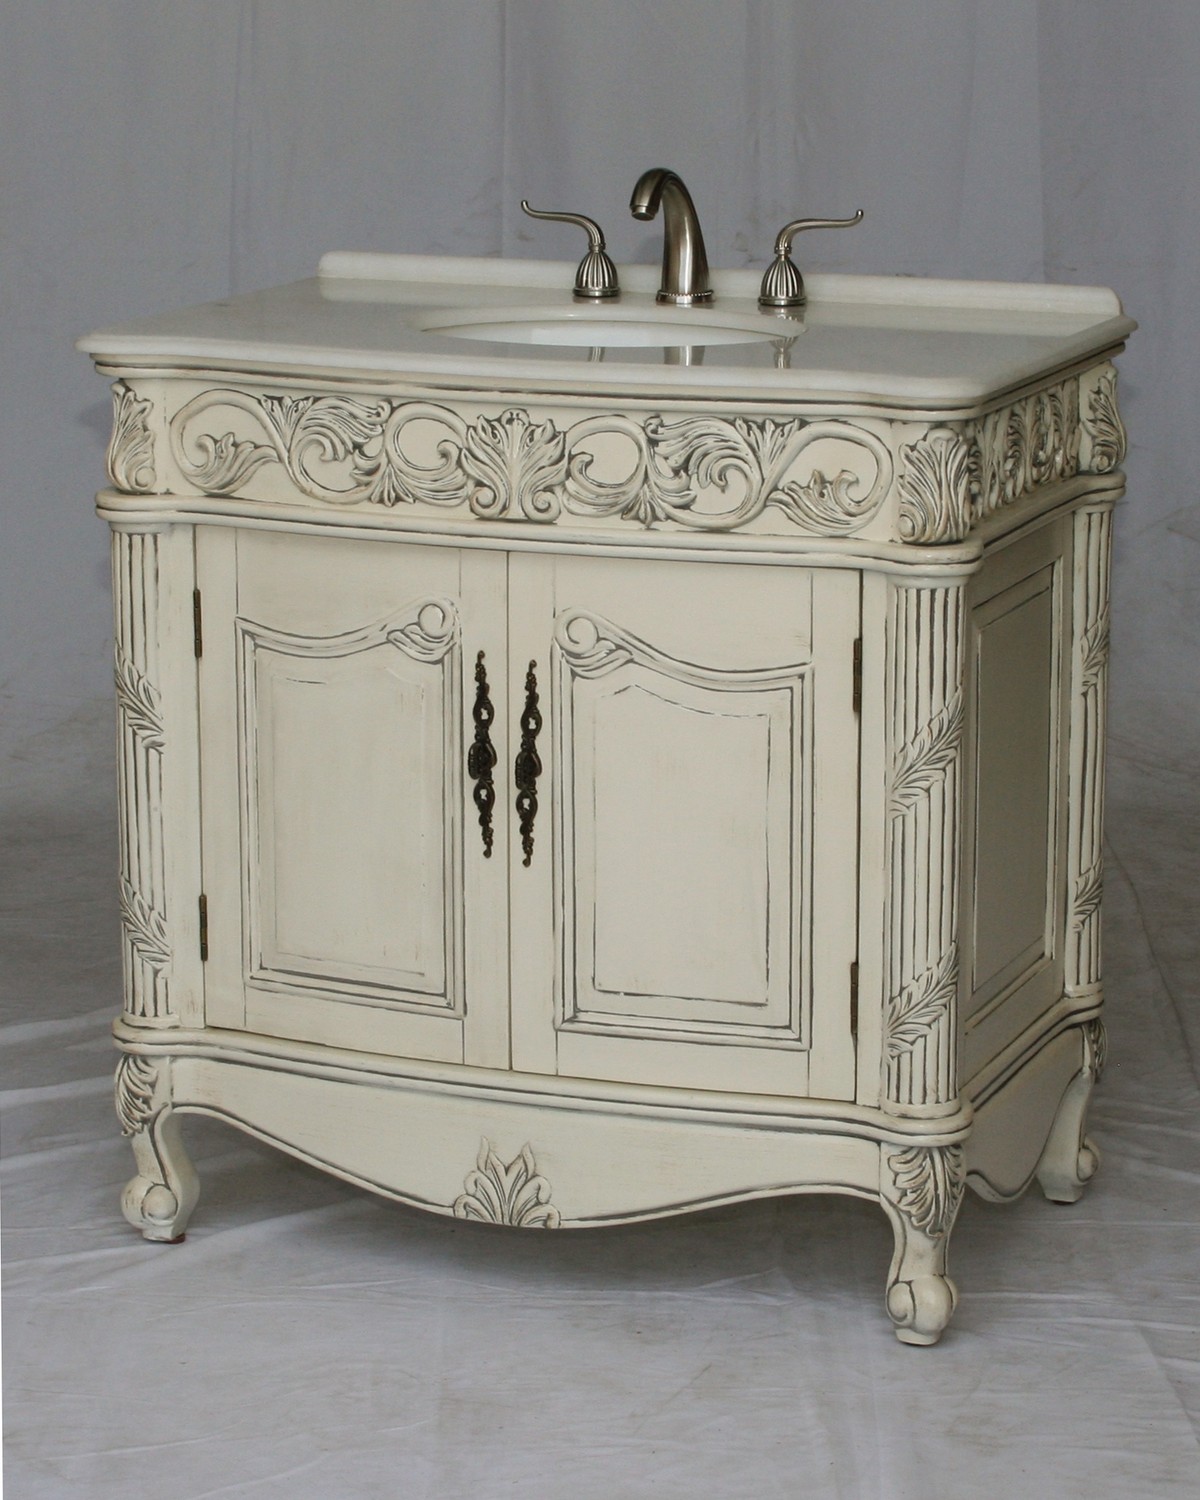 36" Adelina Antique Style Single Sink Bathroom Vanity with Imperial